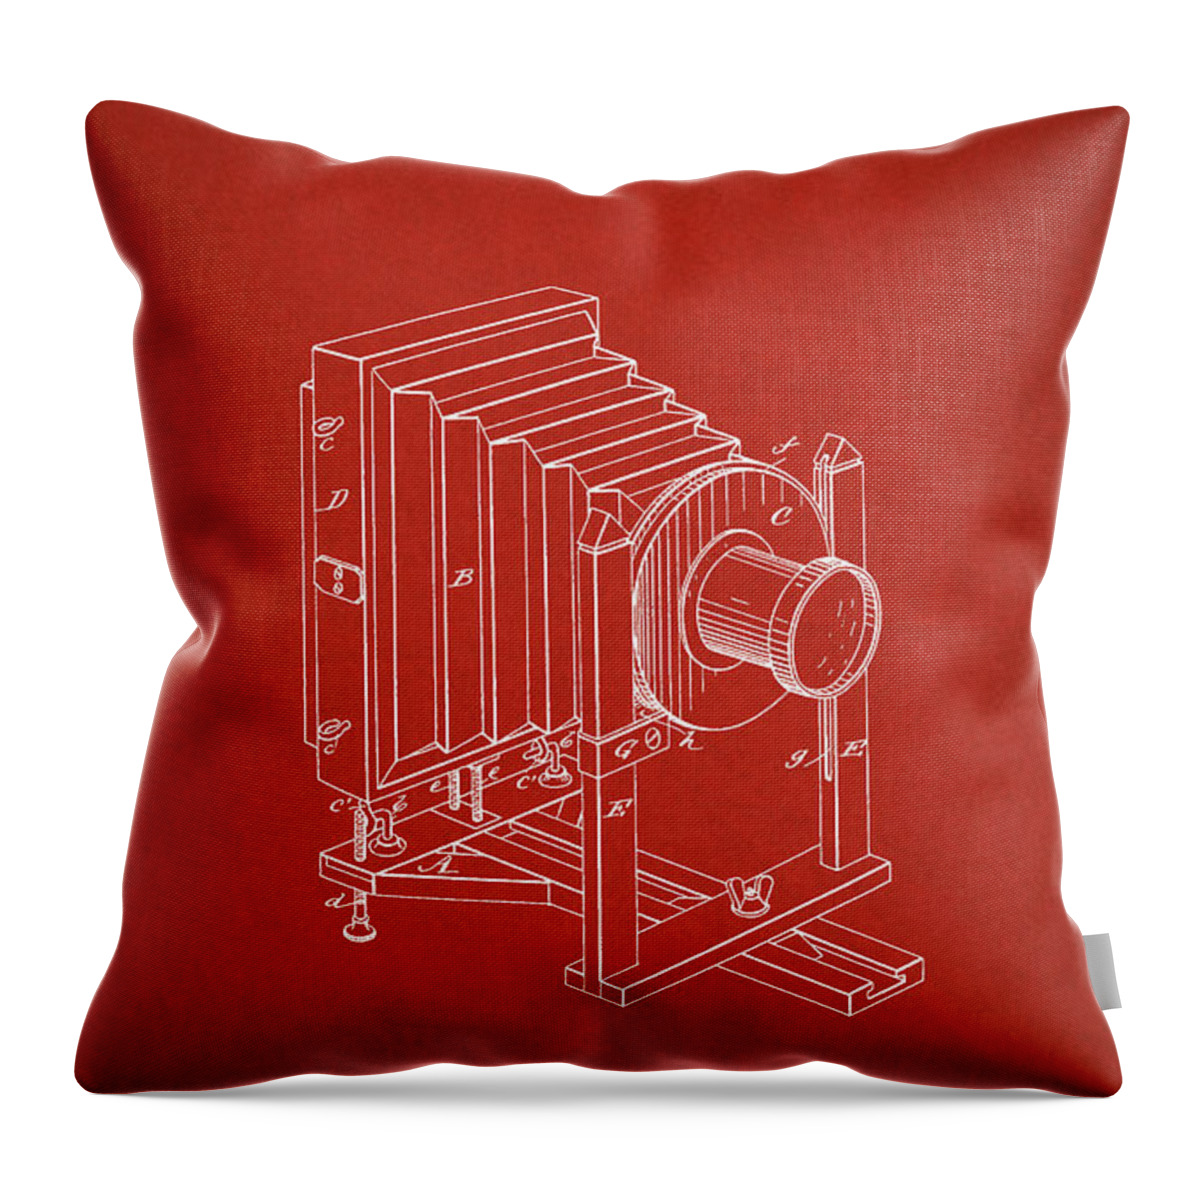 Patent Throw Pillow featuring the digital art 1888 Camera Us Patent Invention Drawing - Red by Todd Aaron